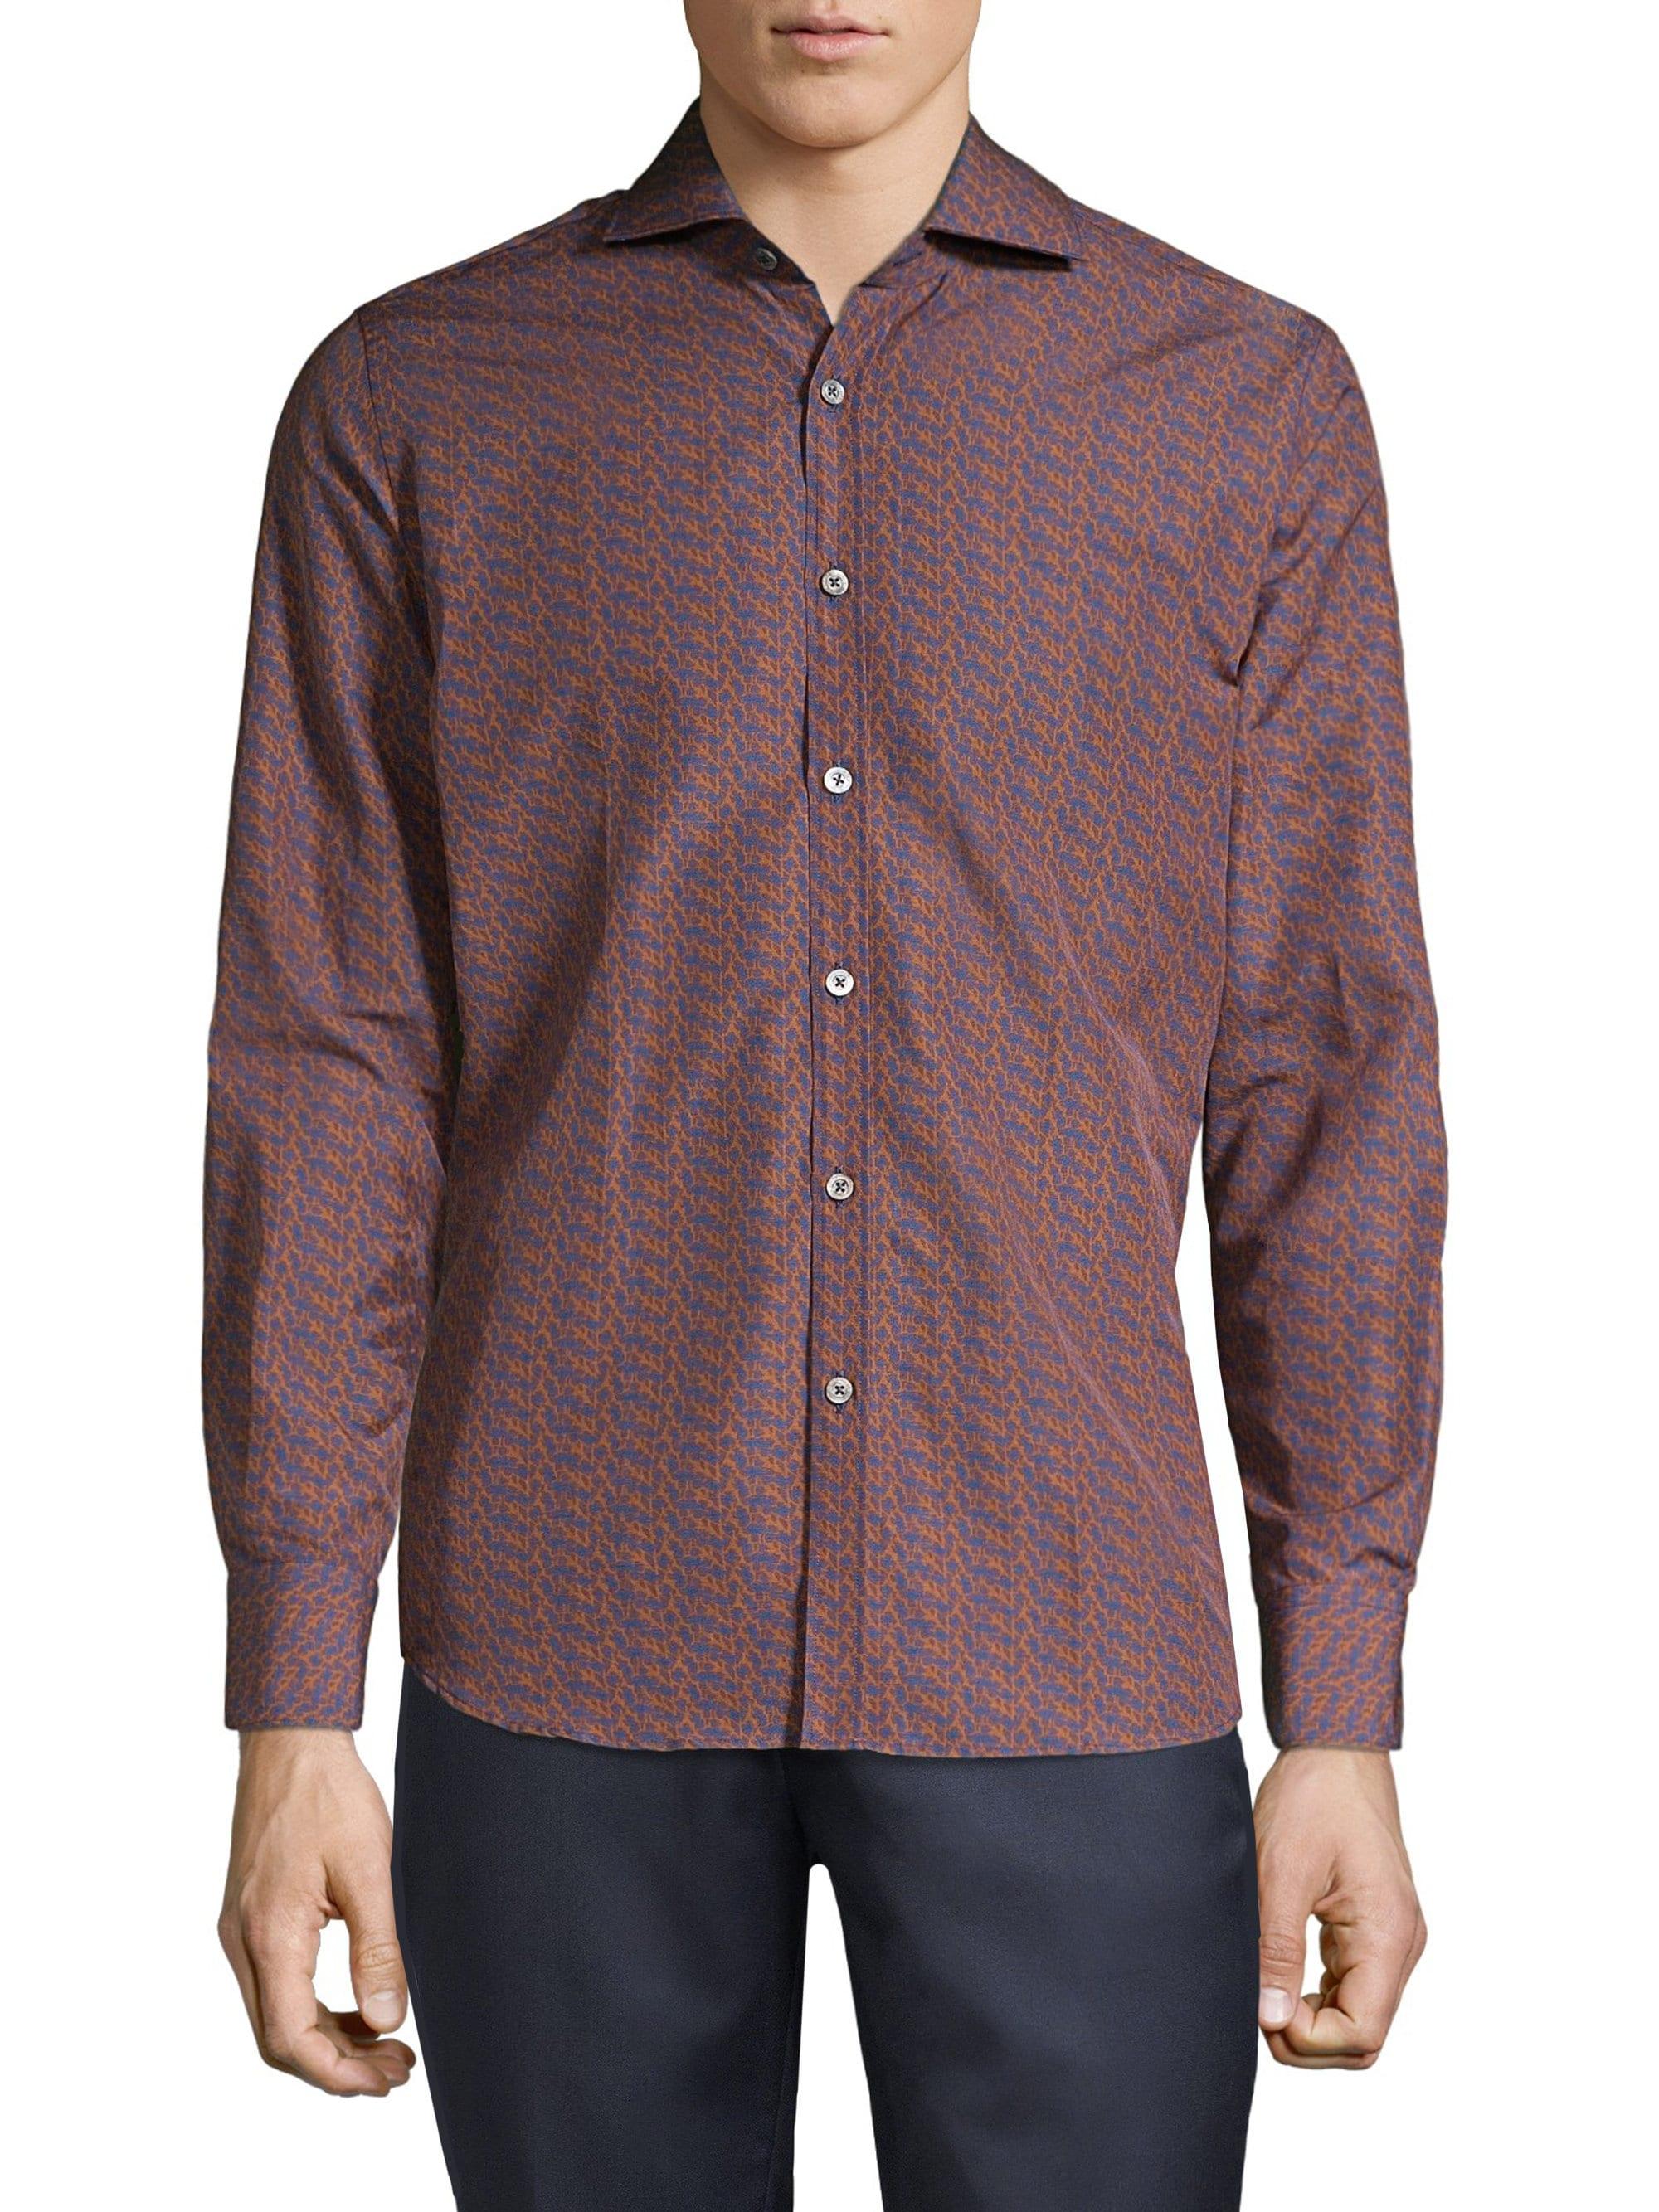 Canali Logo Cotton Shirt in Brown for Men - Lyst